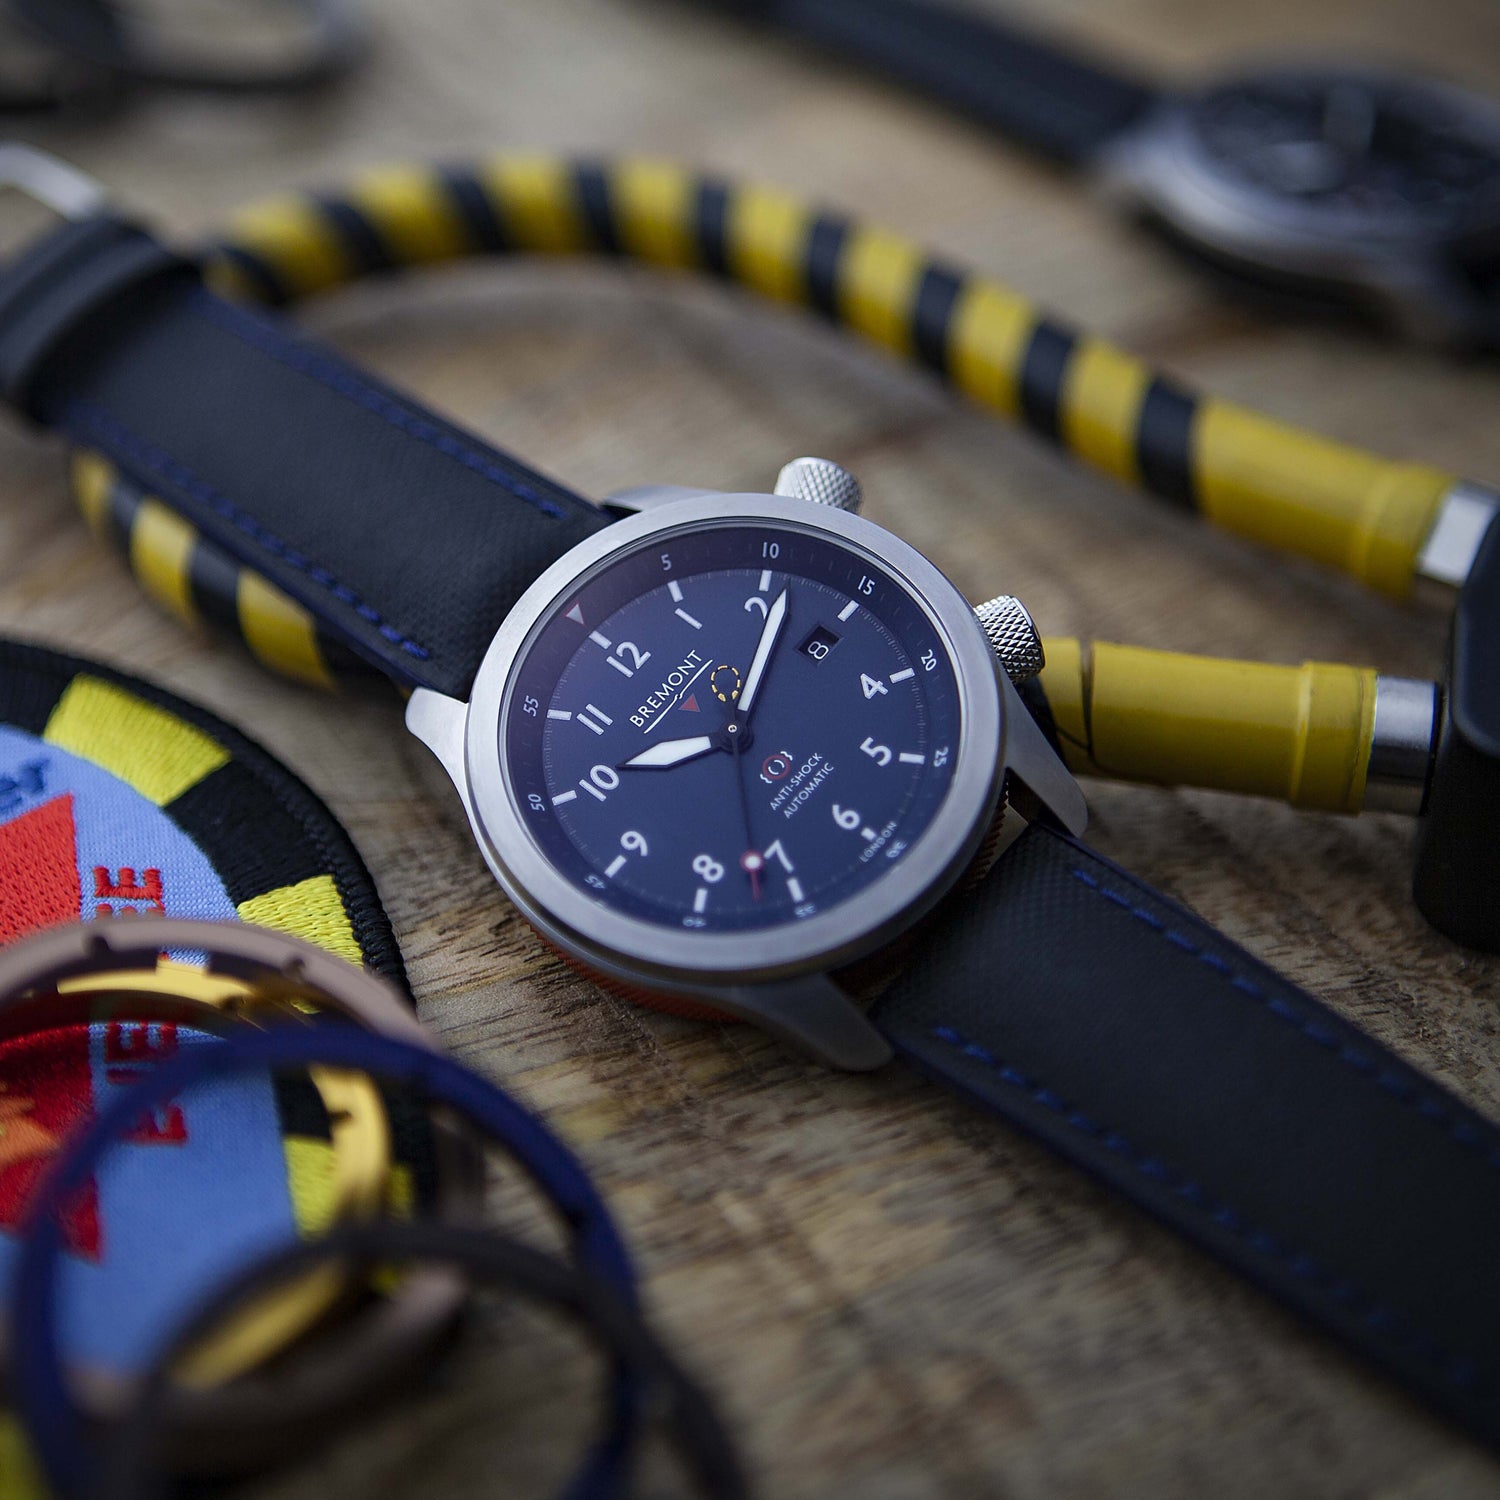 Bremont Chronometers Watches | Mens | MB MBII